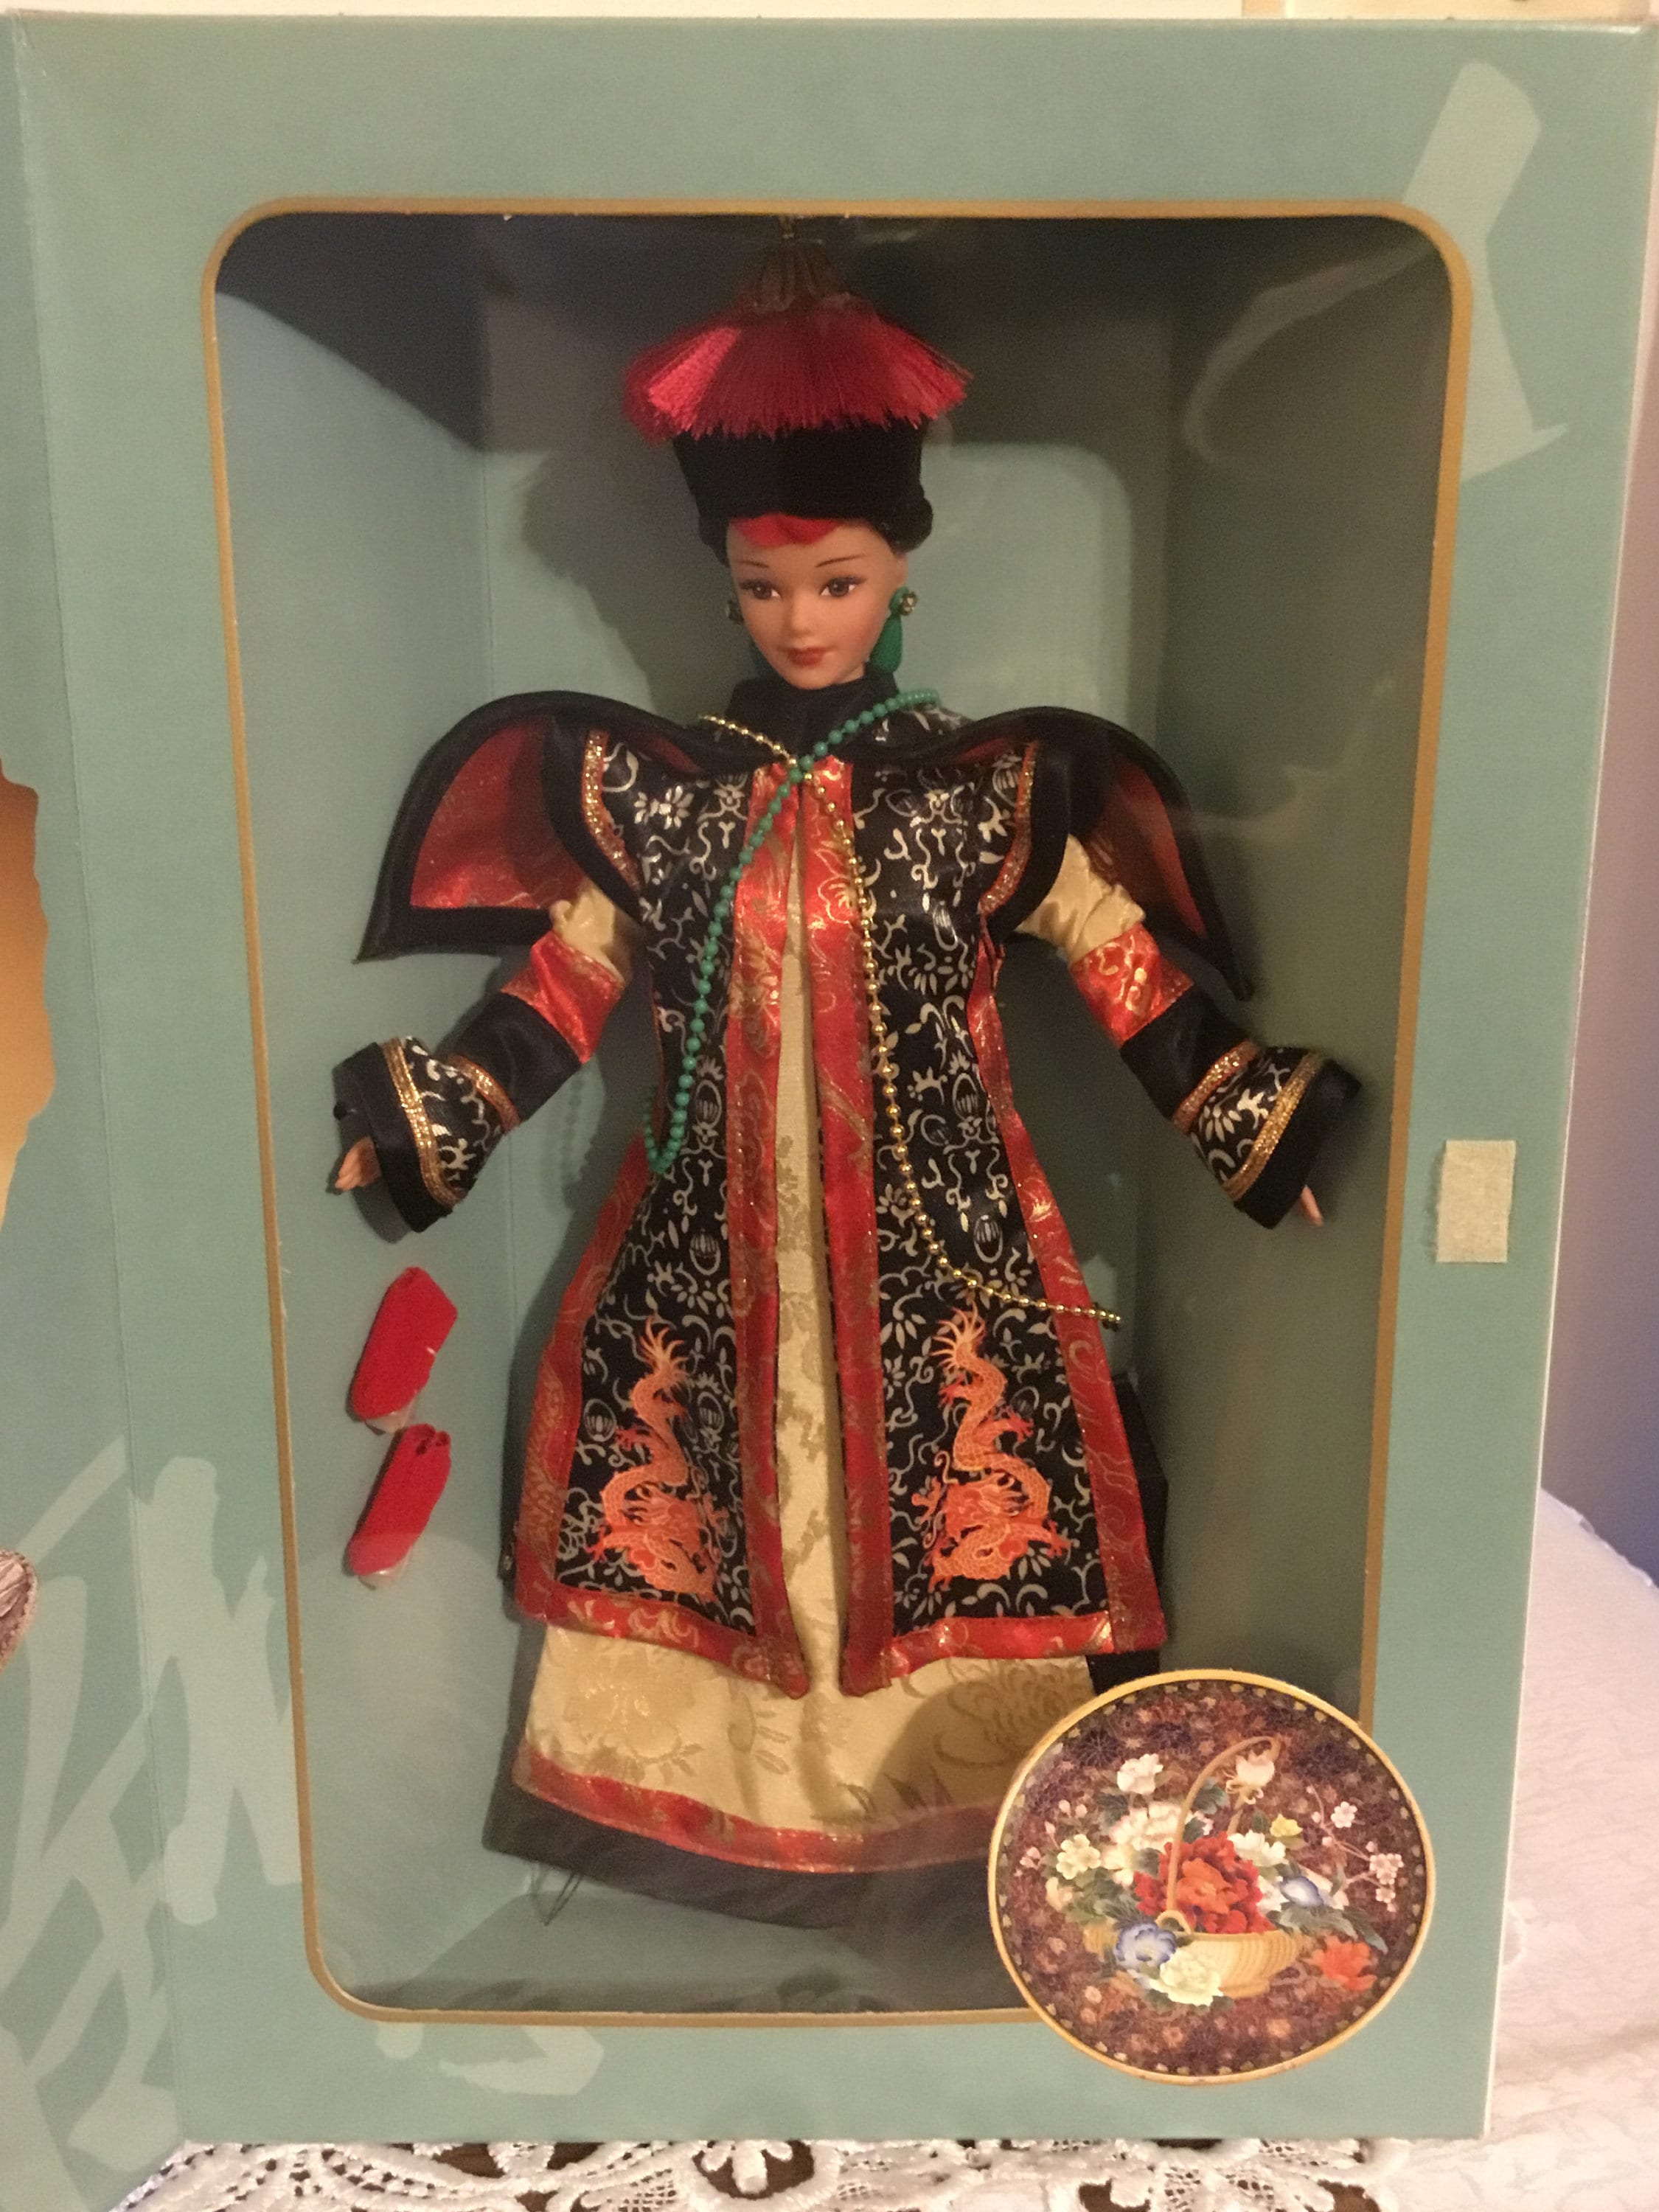 Chinese Empress Barbie Doll 1996 The Great Eras Collection Mattel 16708 NRFB for sale online 